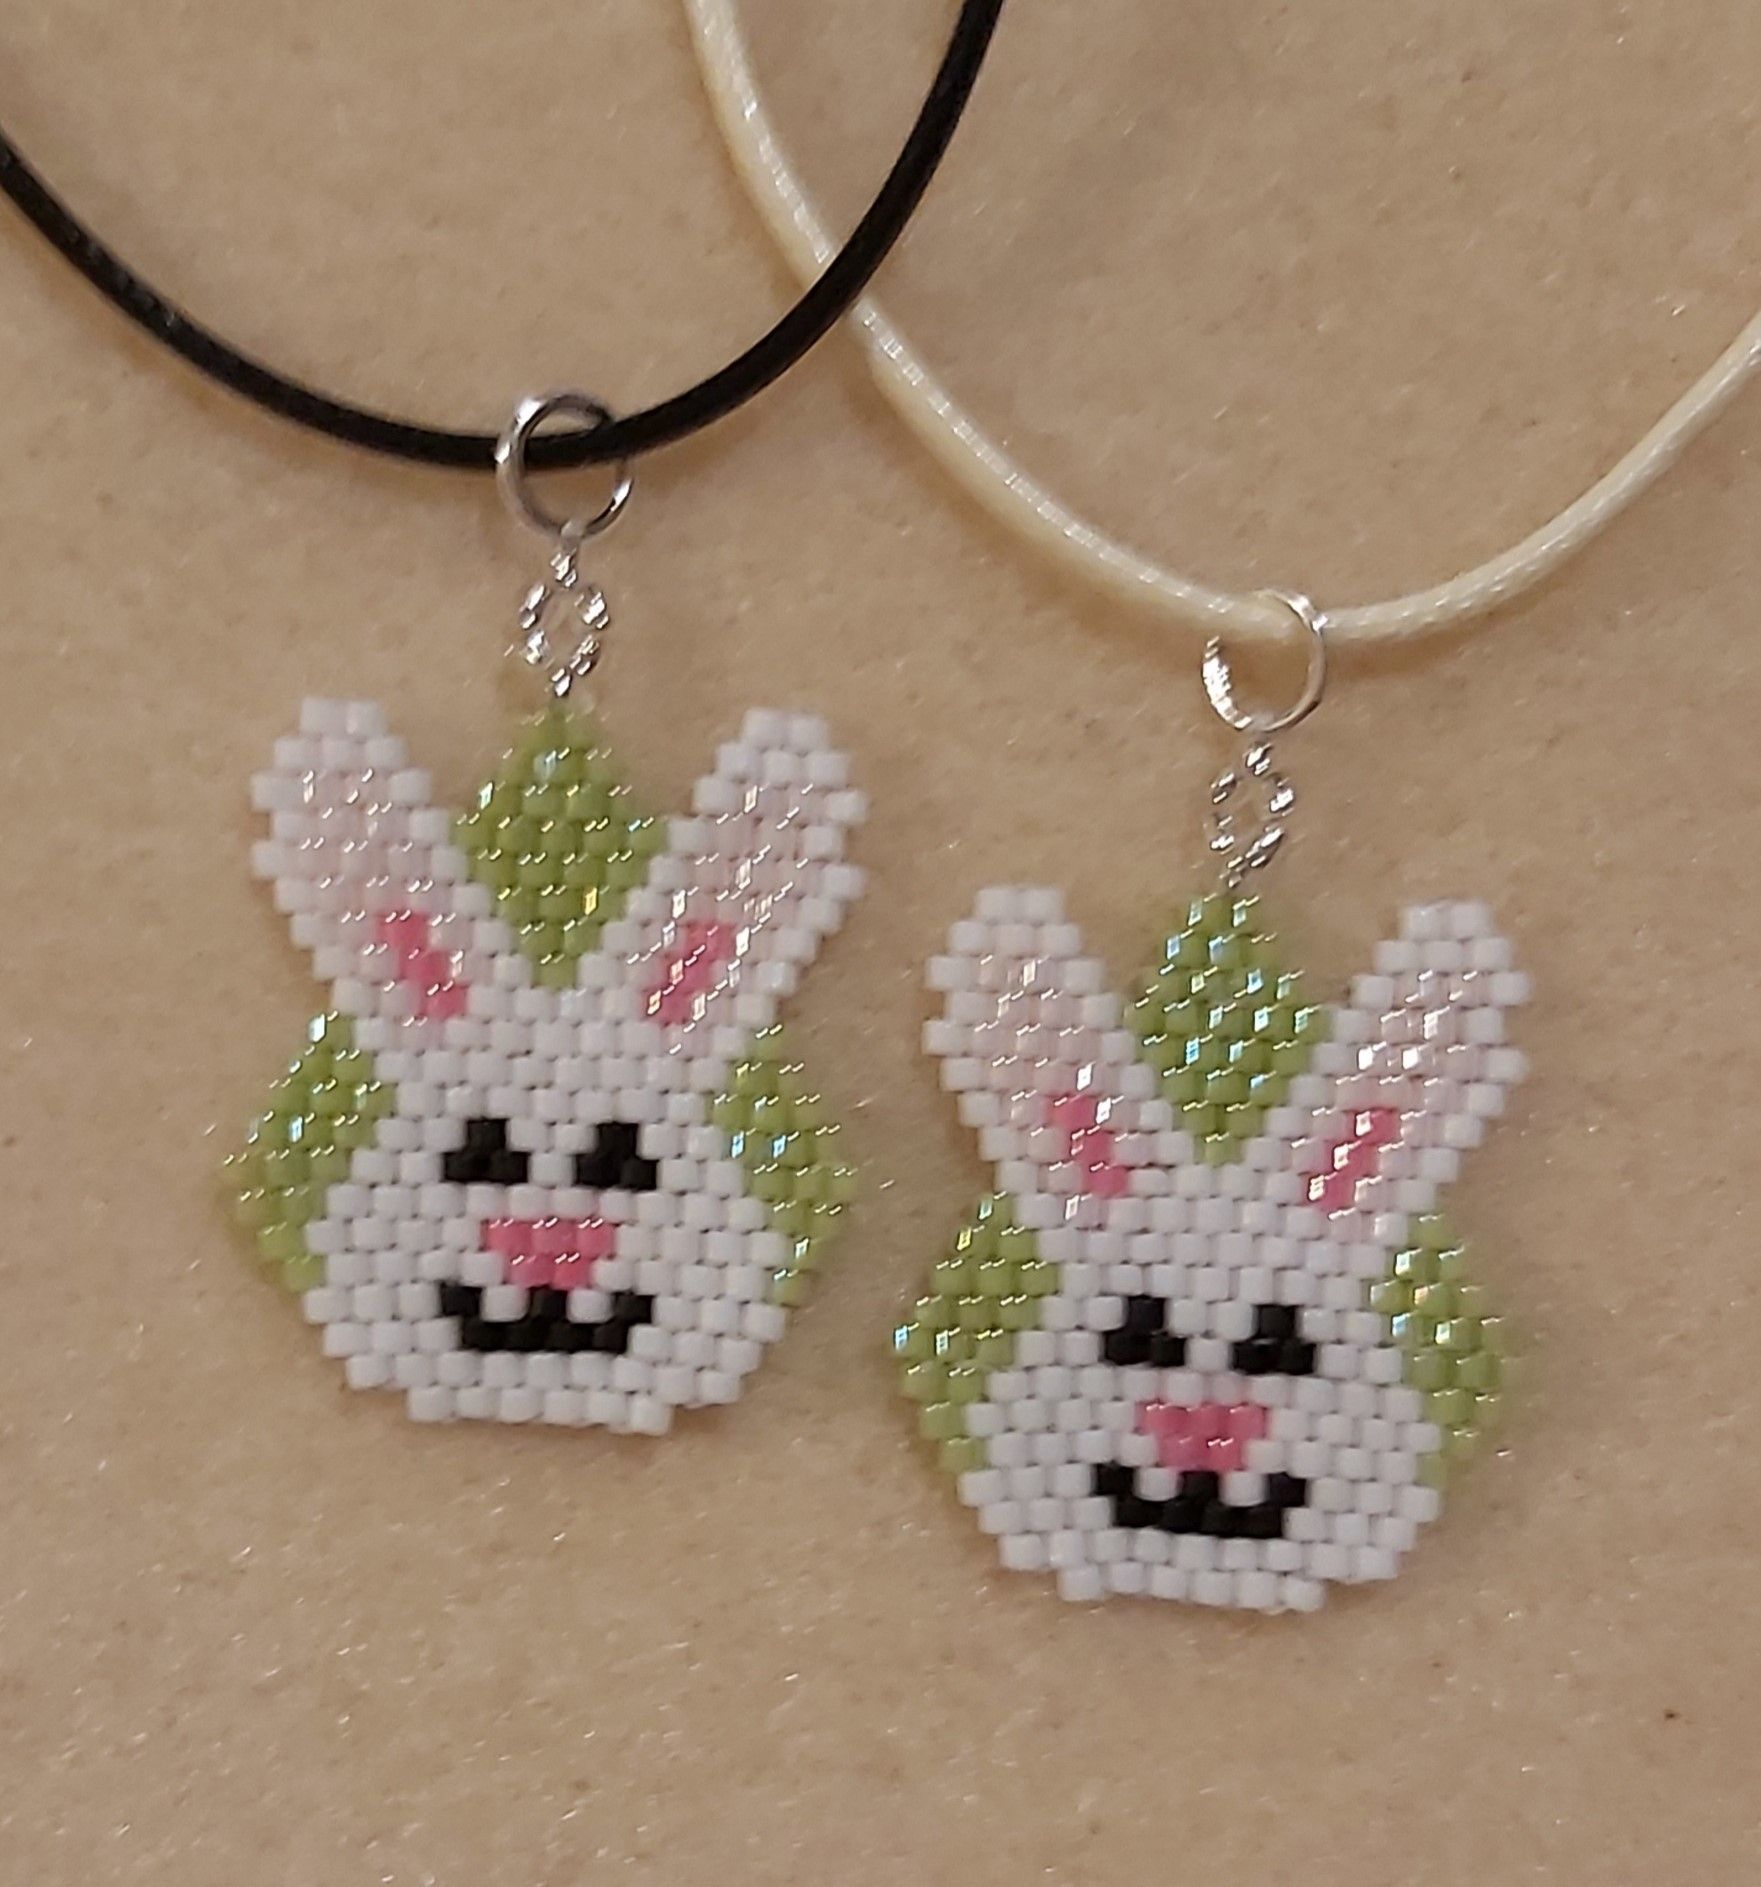 Easter bunny pendant 30mm x 28mm on cord chains

